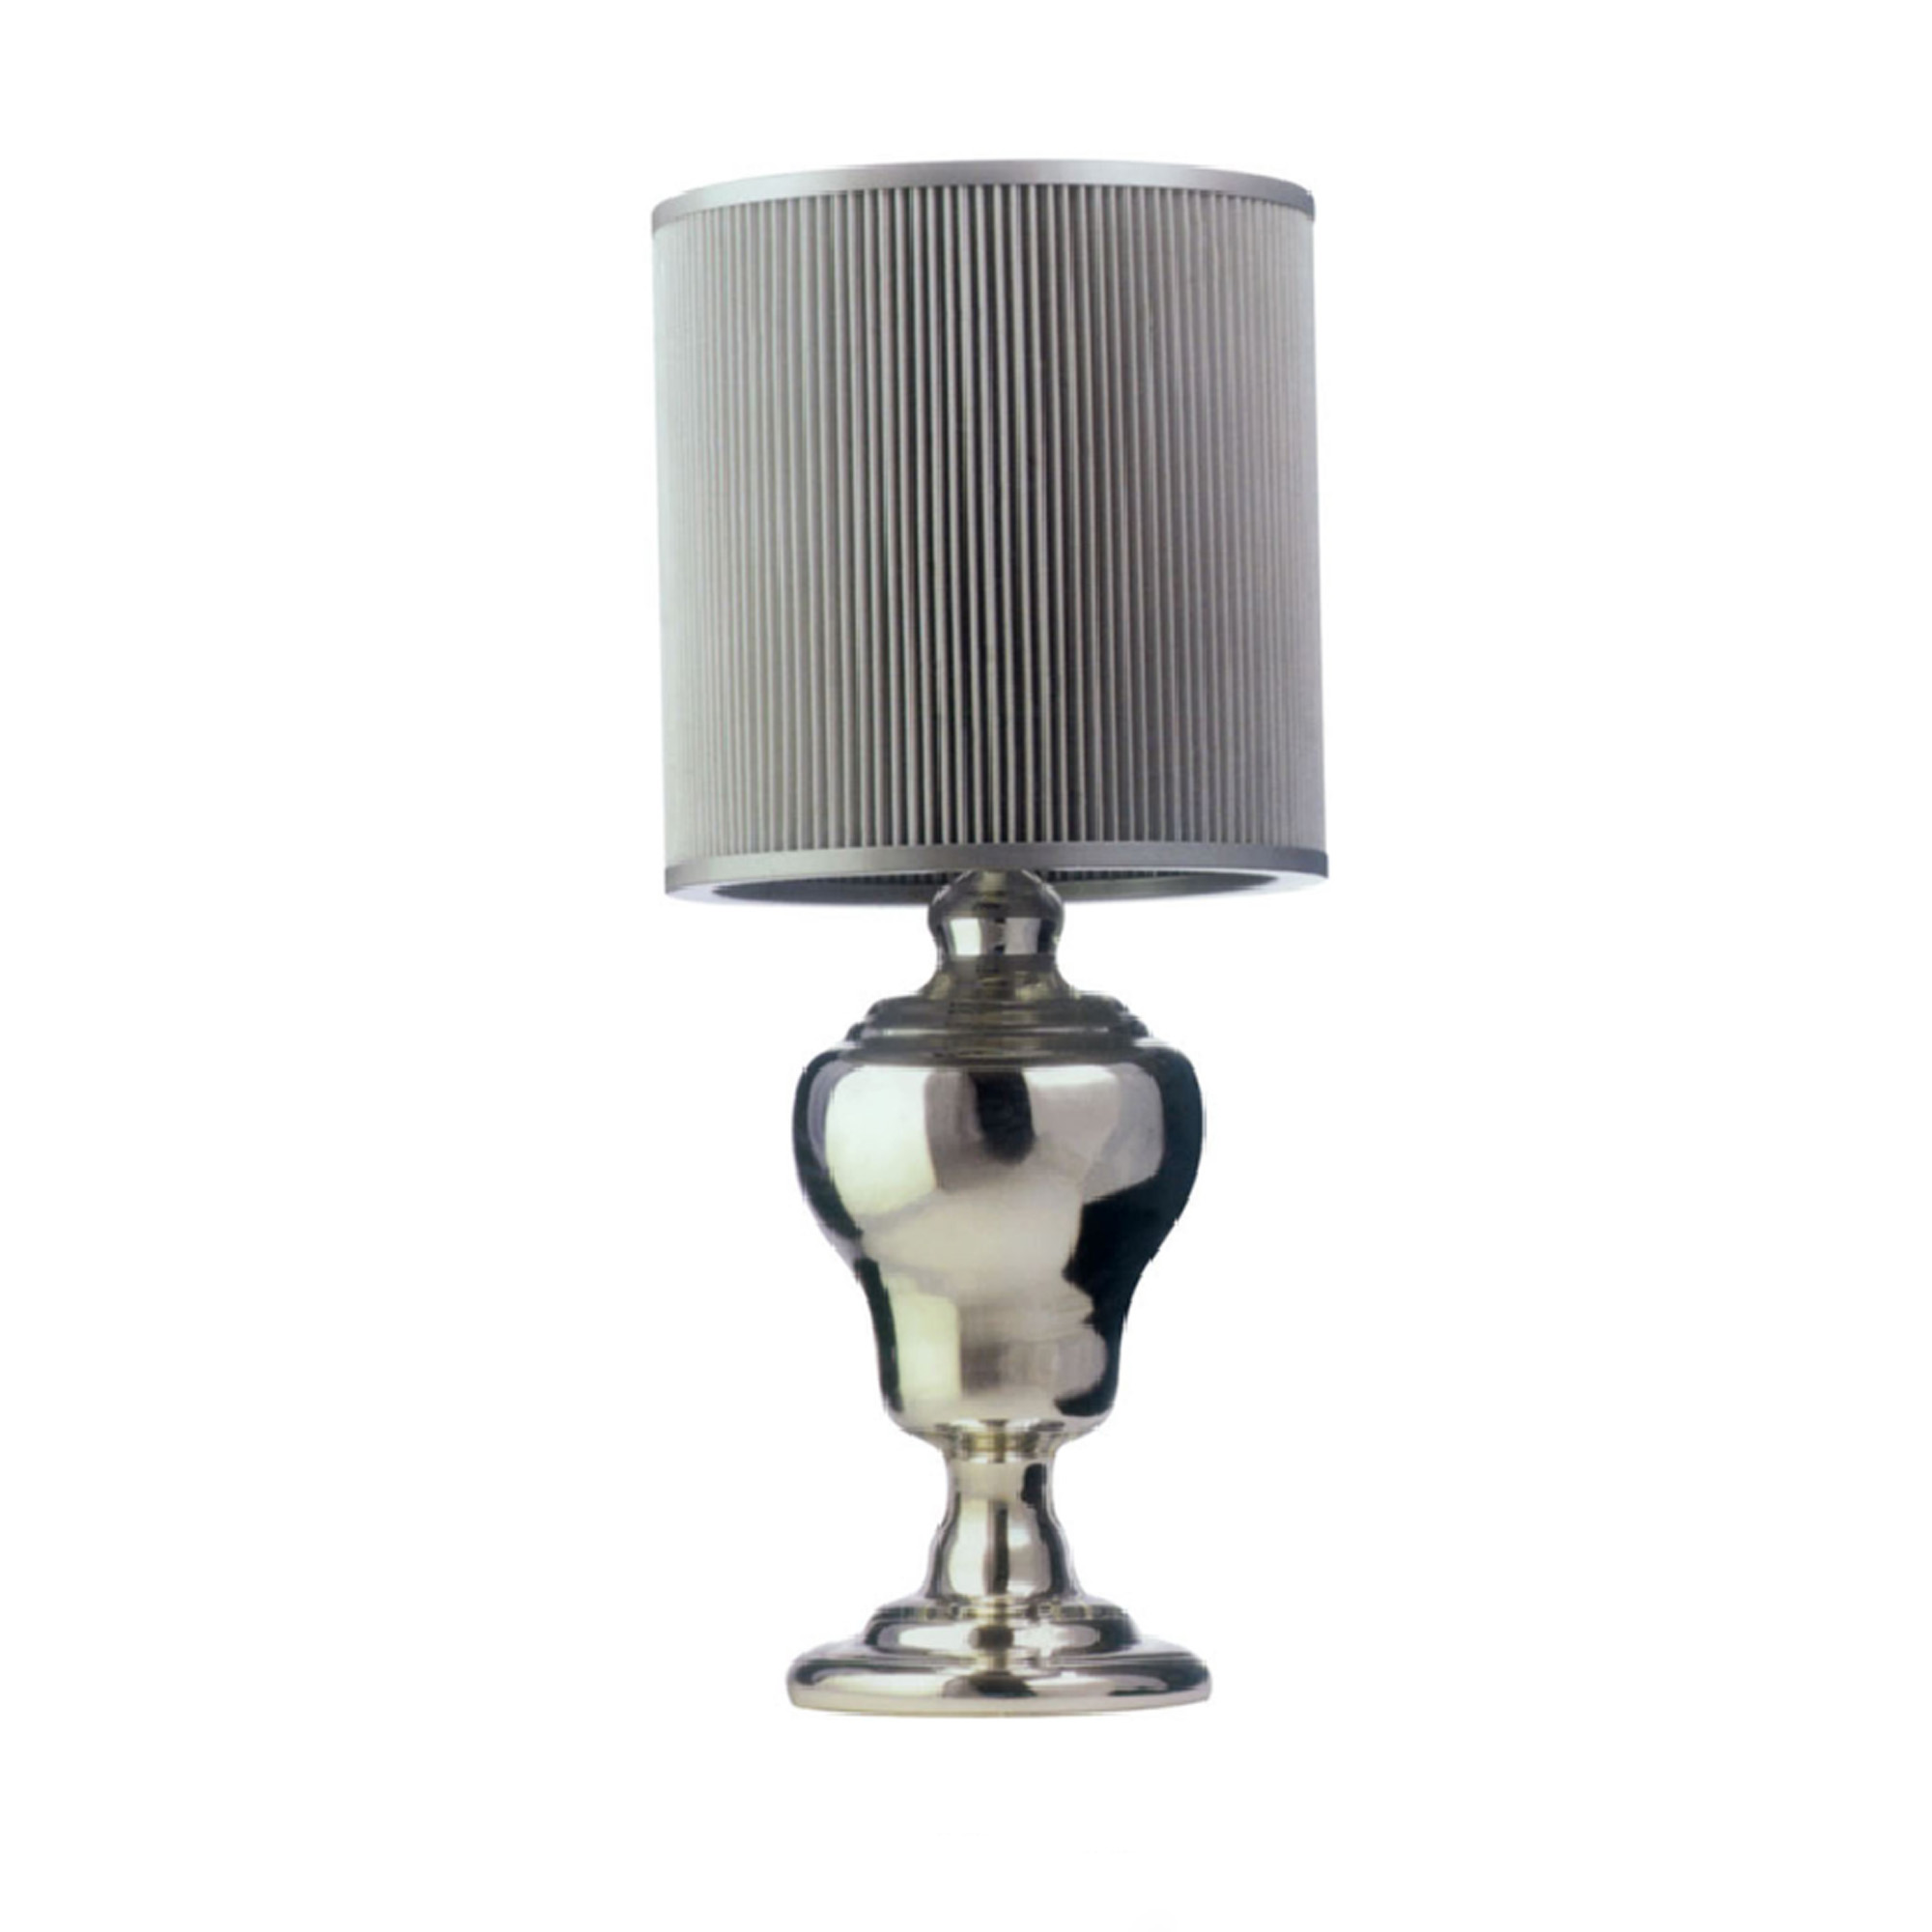 Table lamp for Hotel DT053-GY